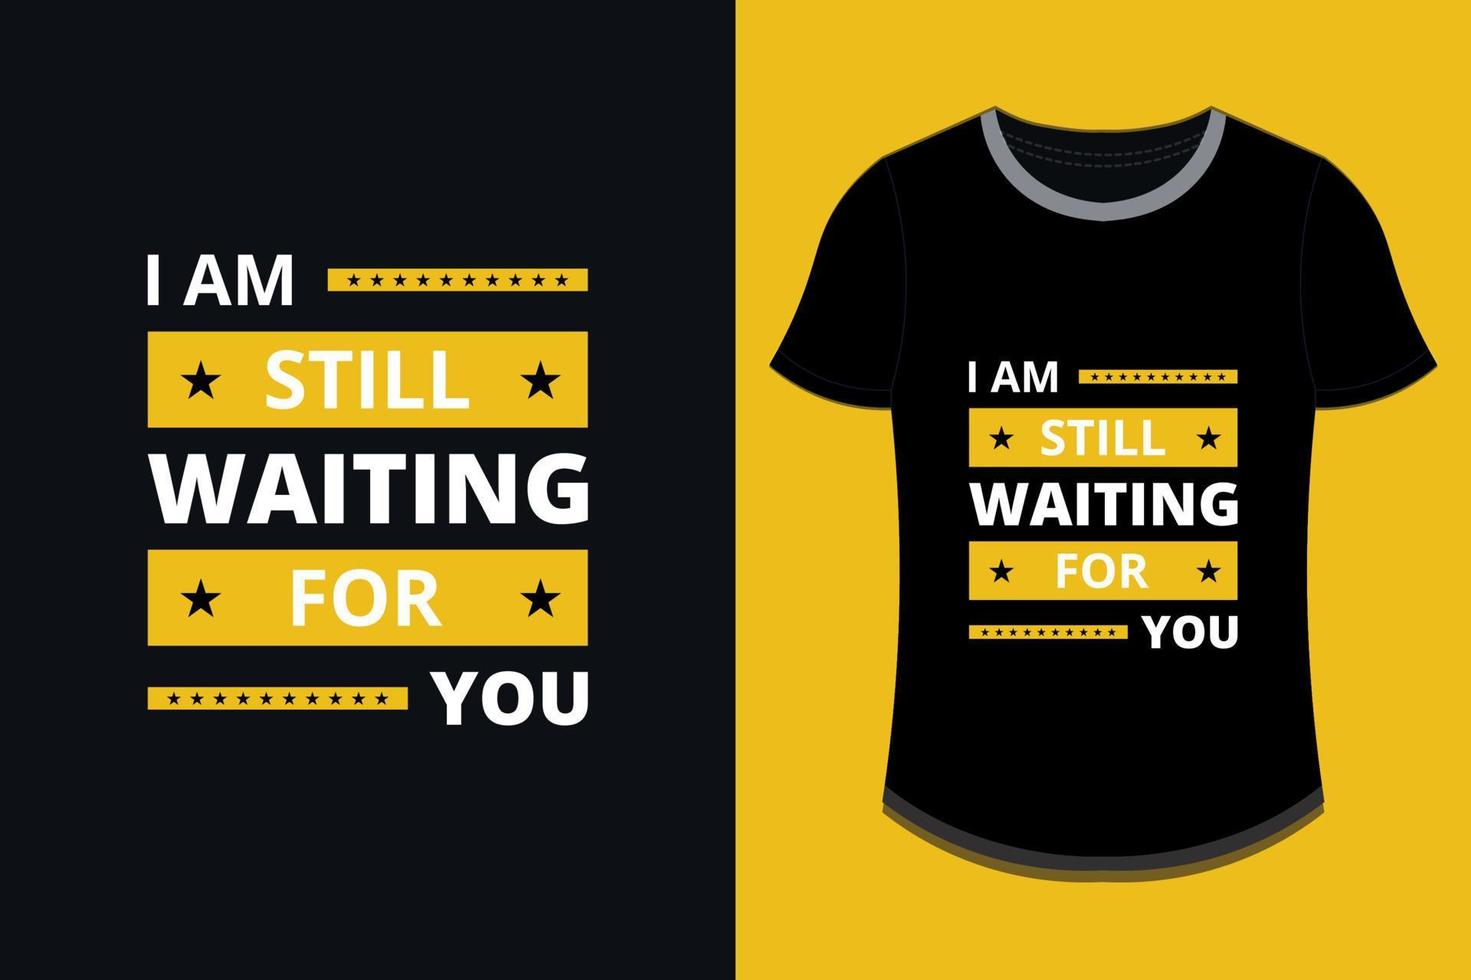 I am still waiting for you modern inspirational quotes t shirt design printable Premium Vector